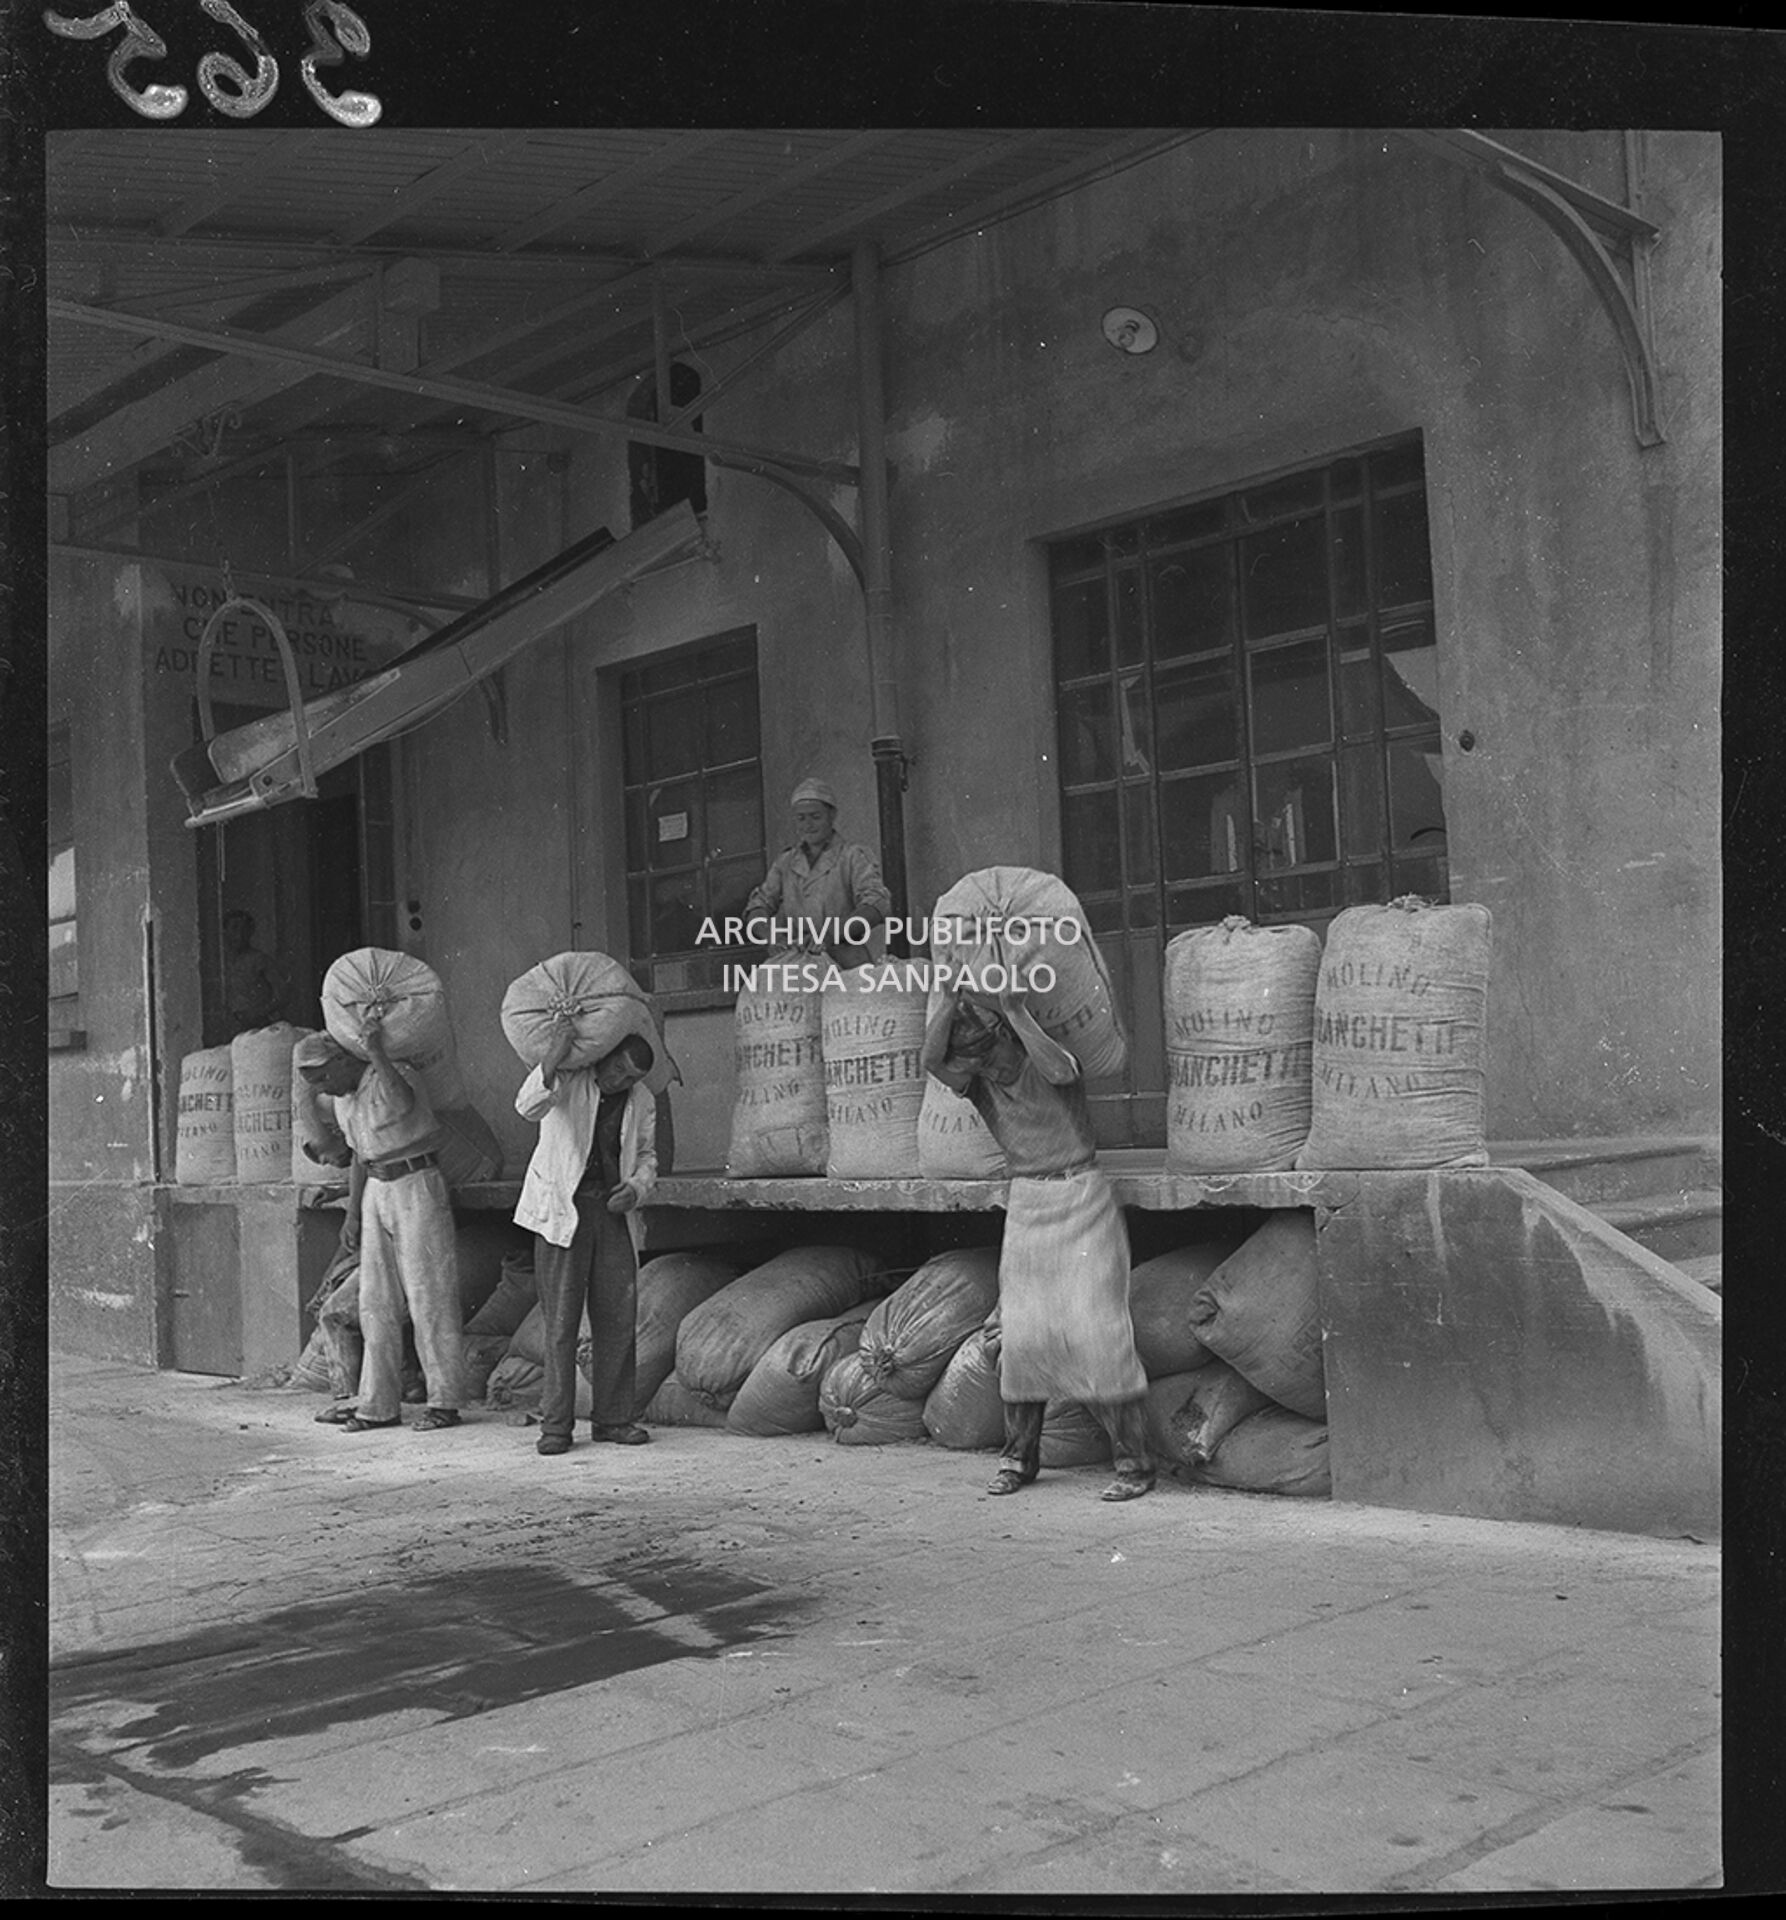 Unloading of flour sacks, sent by Allied Forces to help the local population